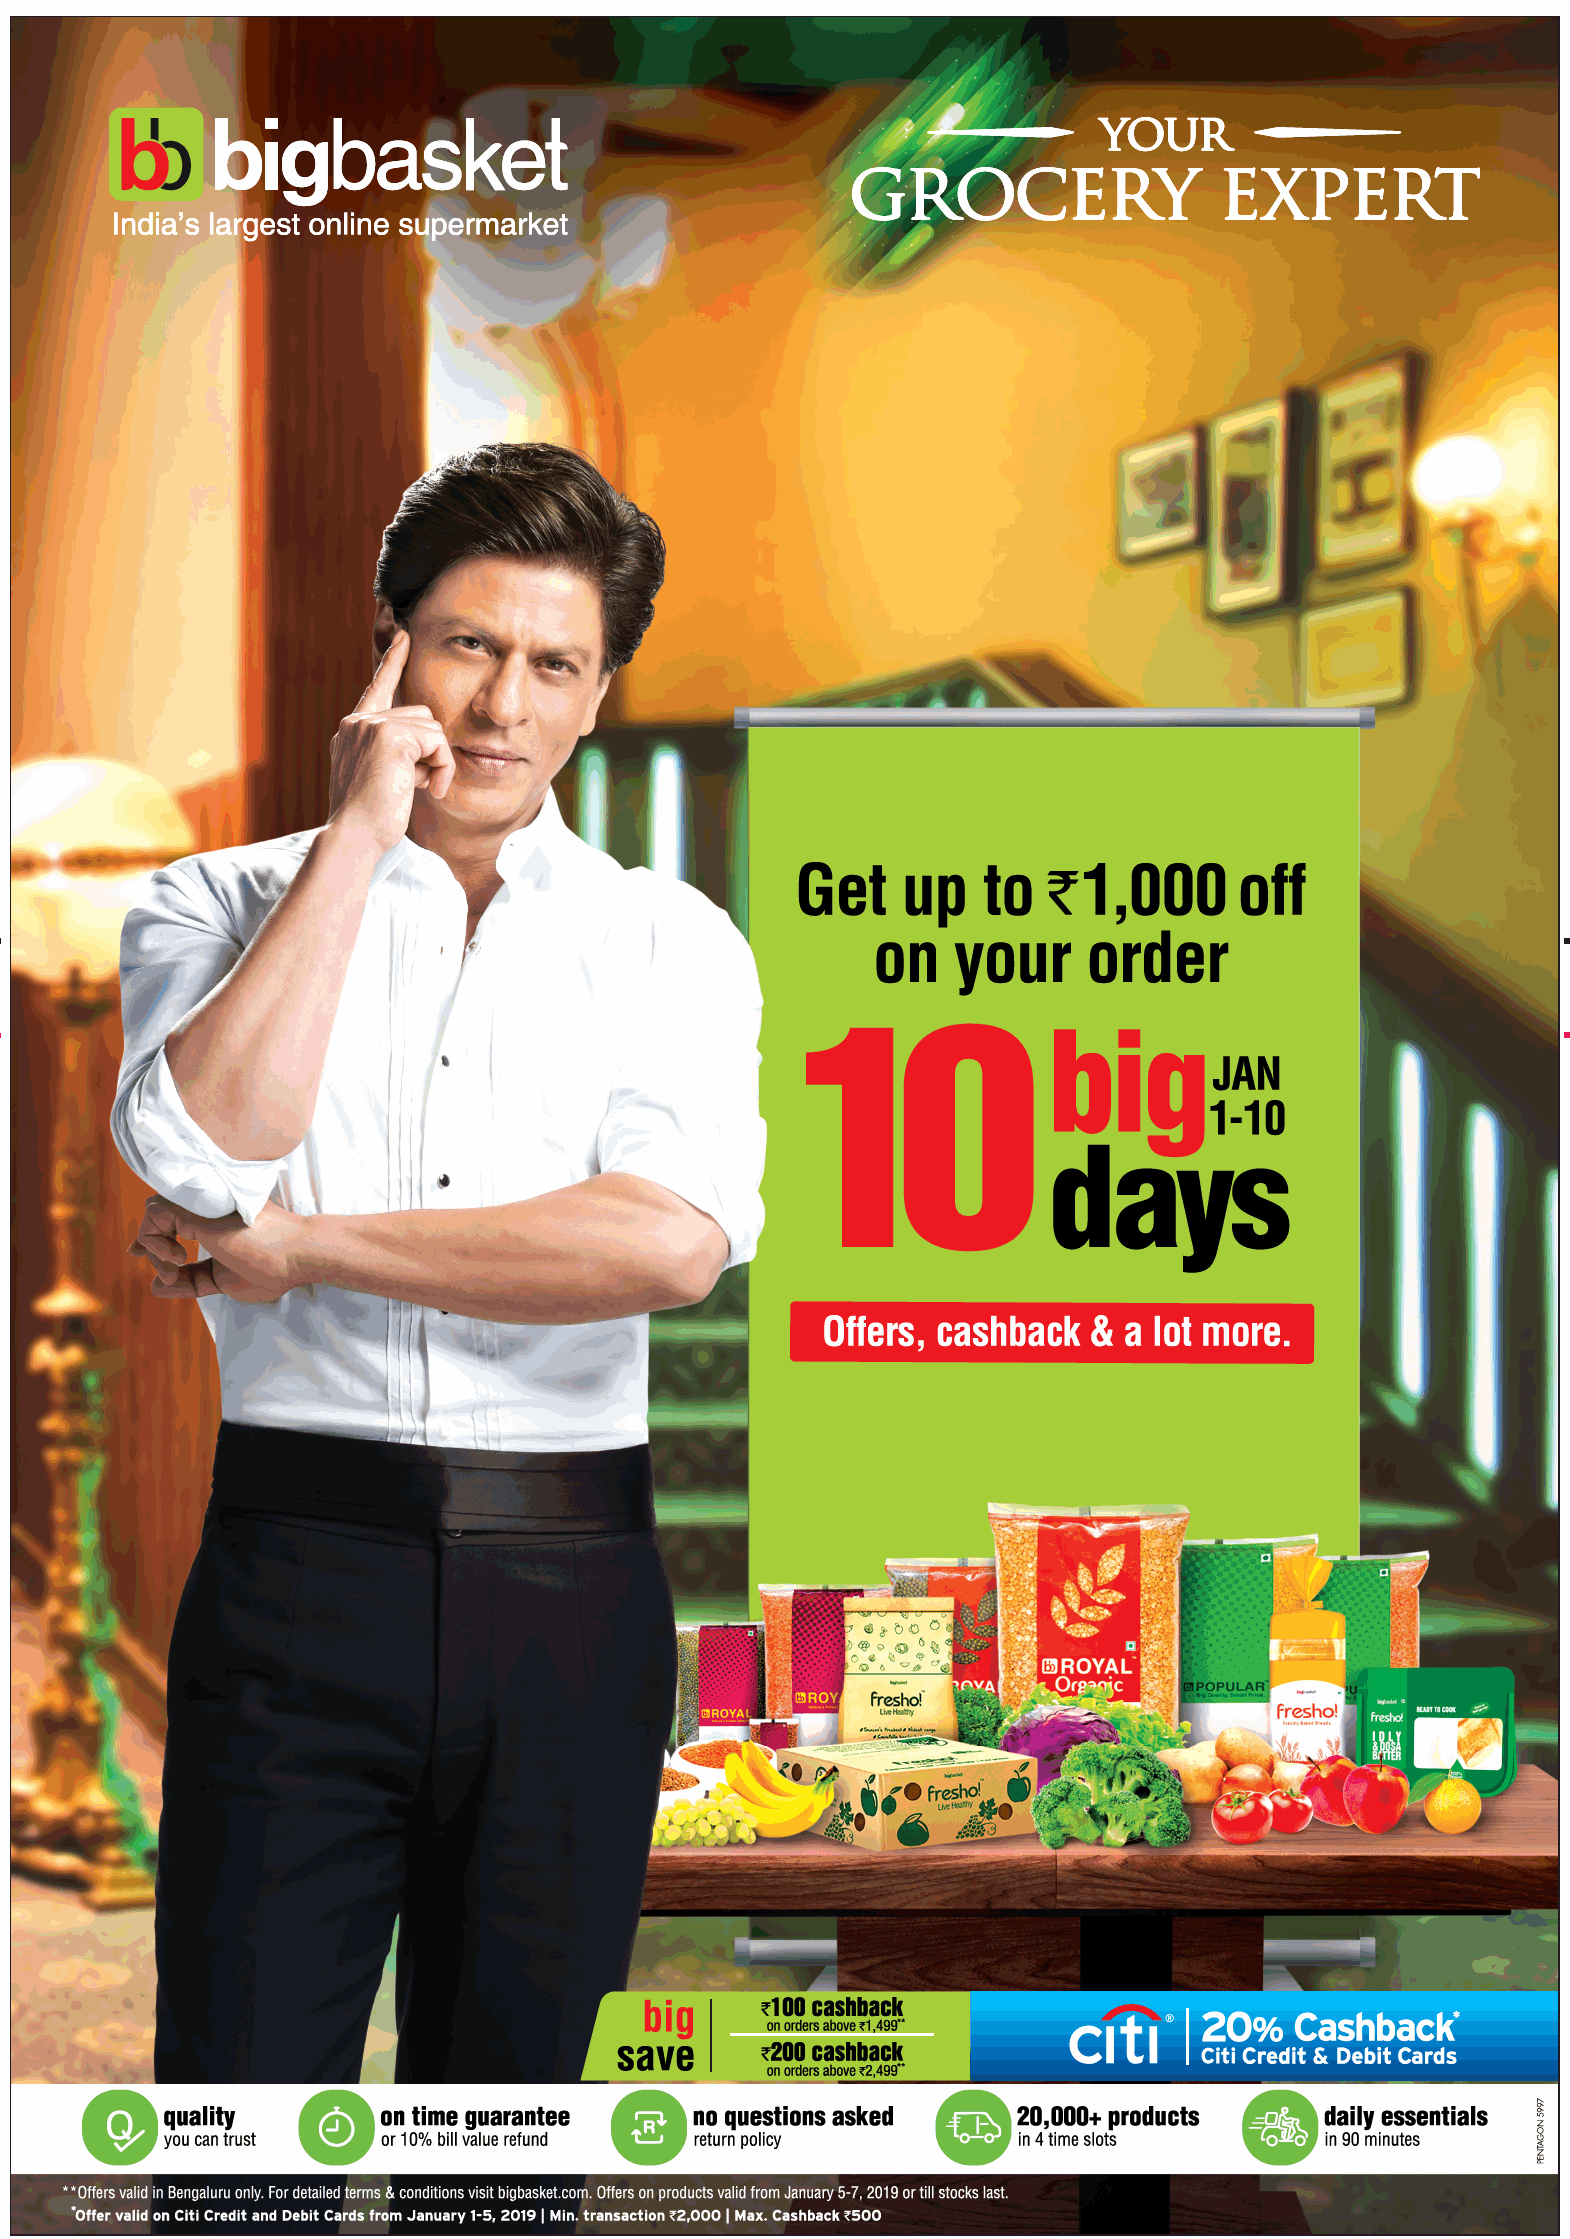 bigbasket-your-grocery-expert-get-upto-rs-1000-off-ad-bangalore-times-05-01-2019.png